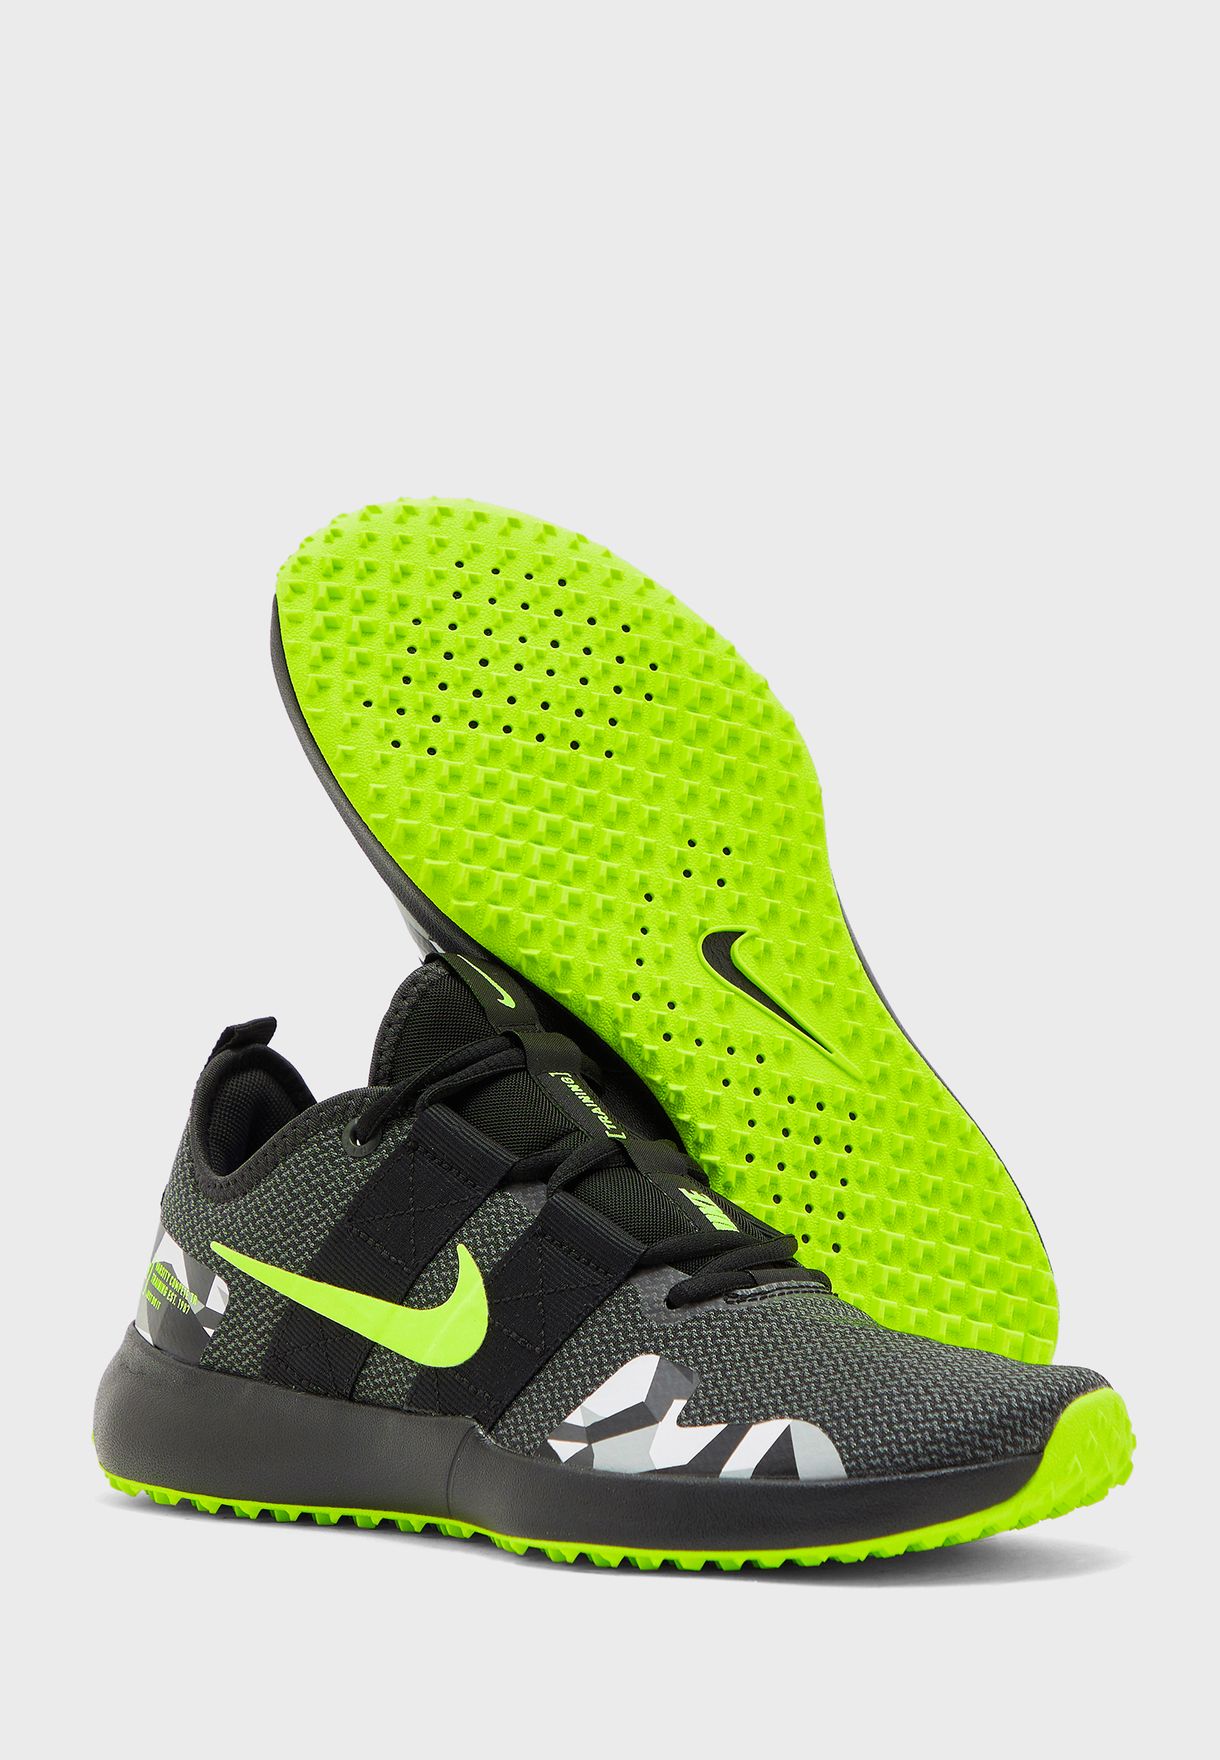 nike varsity compete tr 2 ghost green